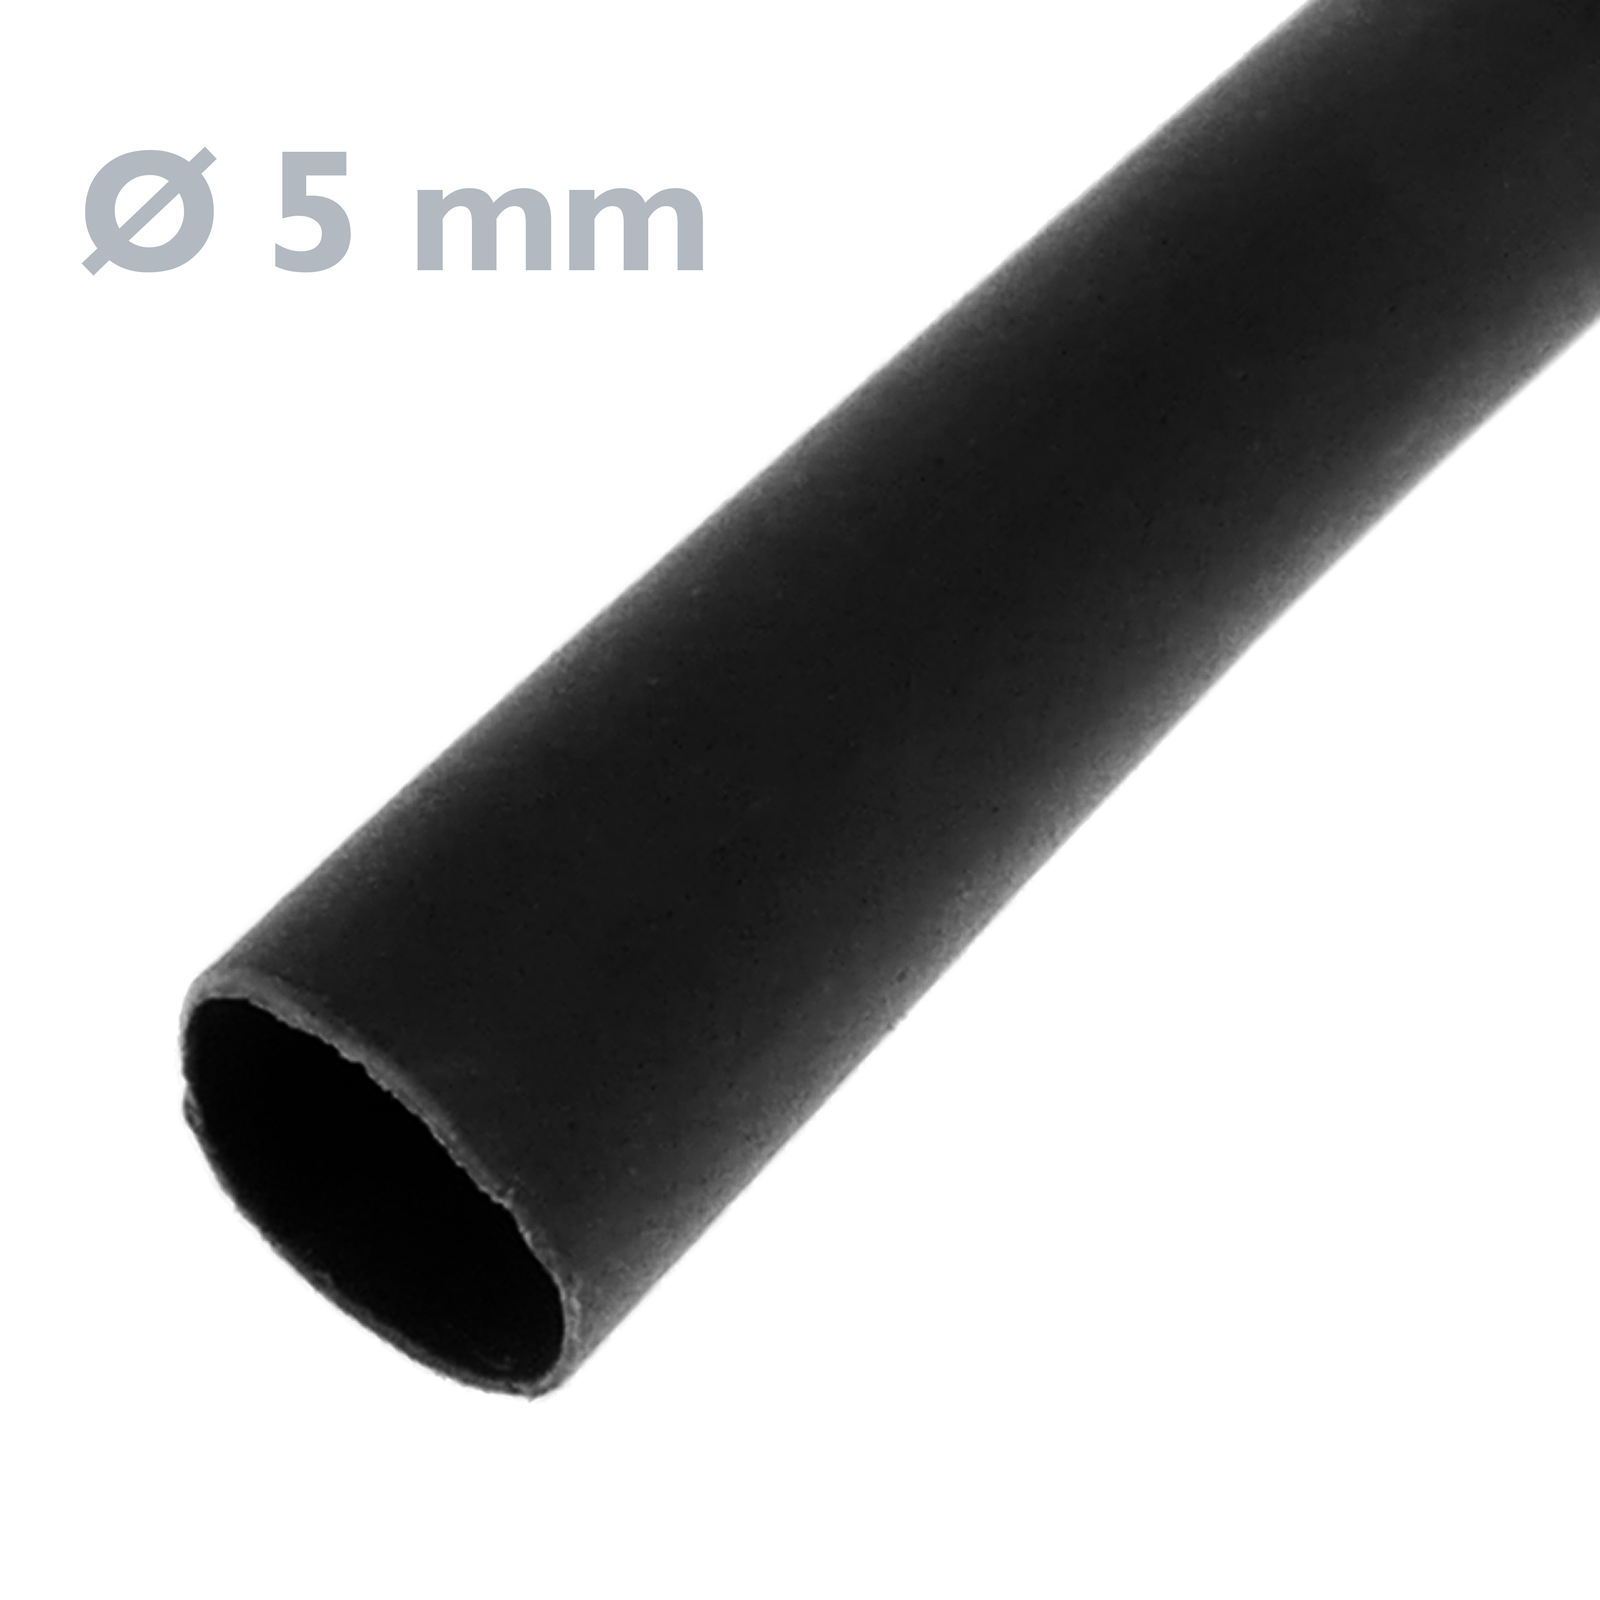 2:1 Heat Shrink Tubing here: Ø1/2inch-20ft Select 1 of 13 Sizes & 5 Lengths by ISOLATECH Ø12mm-6meter 